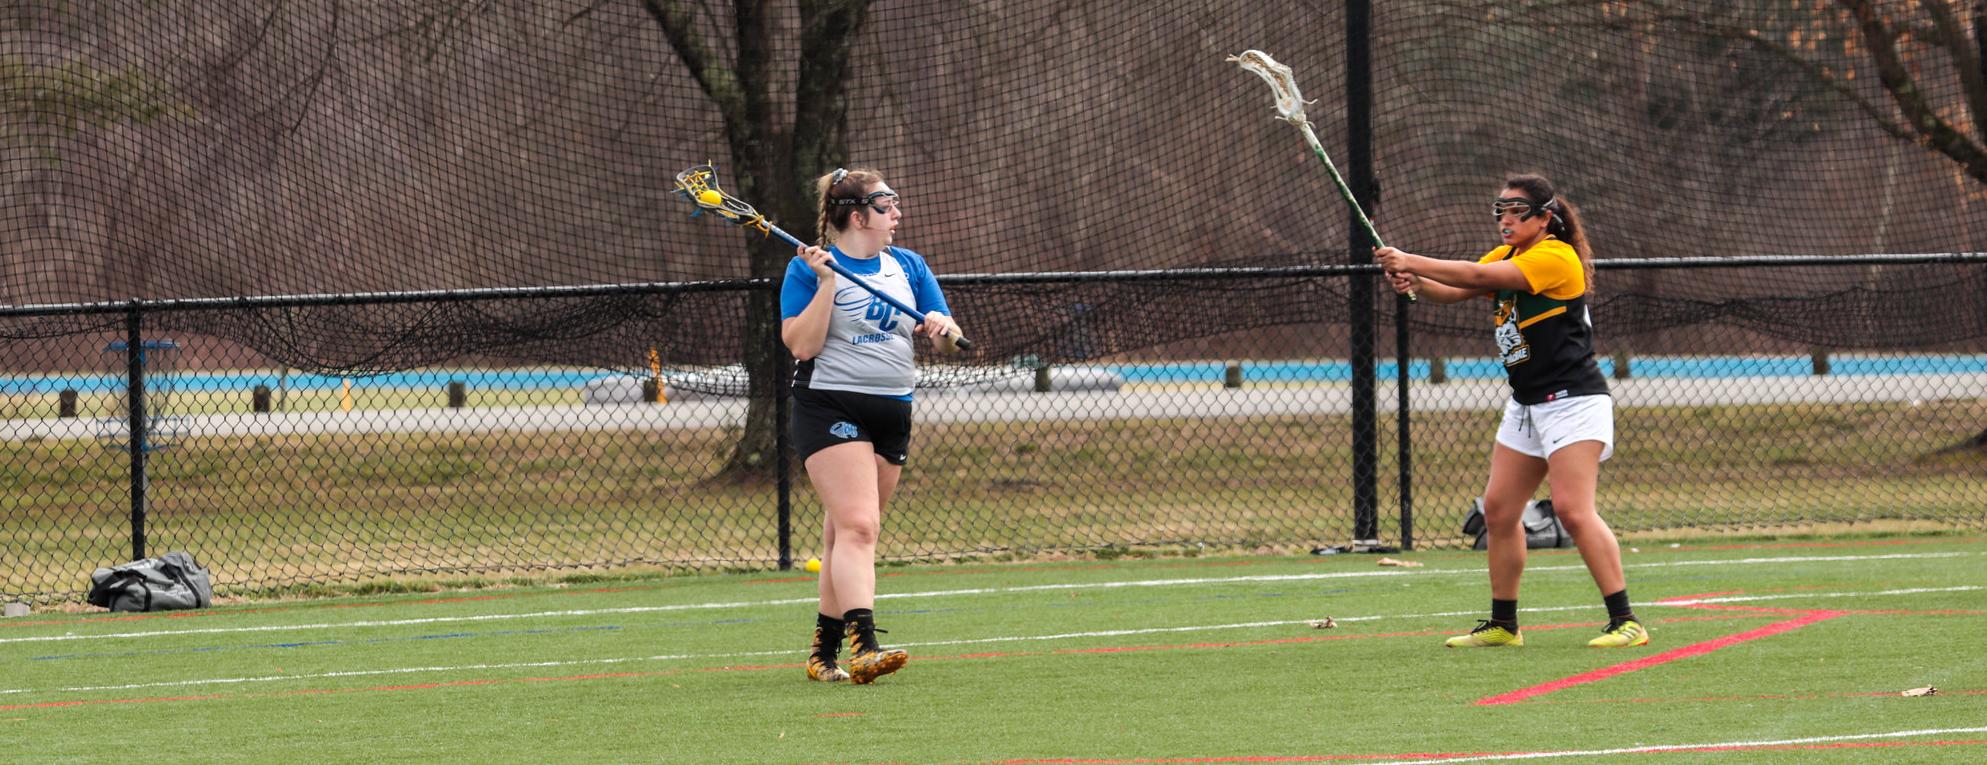 BC's Autumn Kraemer led the Tornados in goals and points in 2020 (Photo courtesy of Victoria Brayman '22).